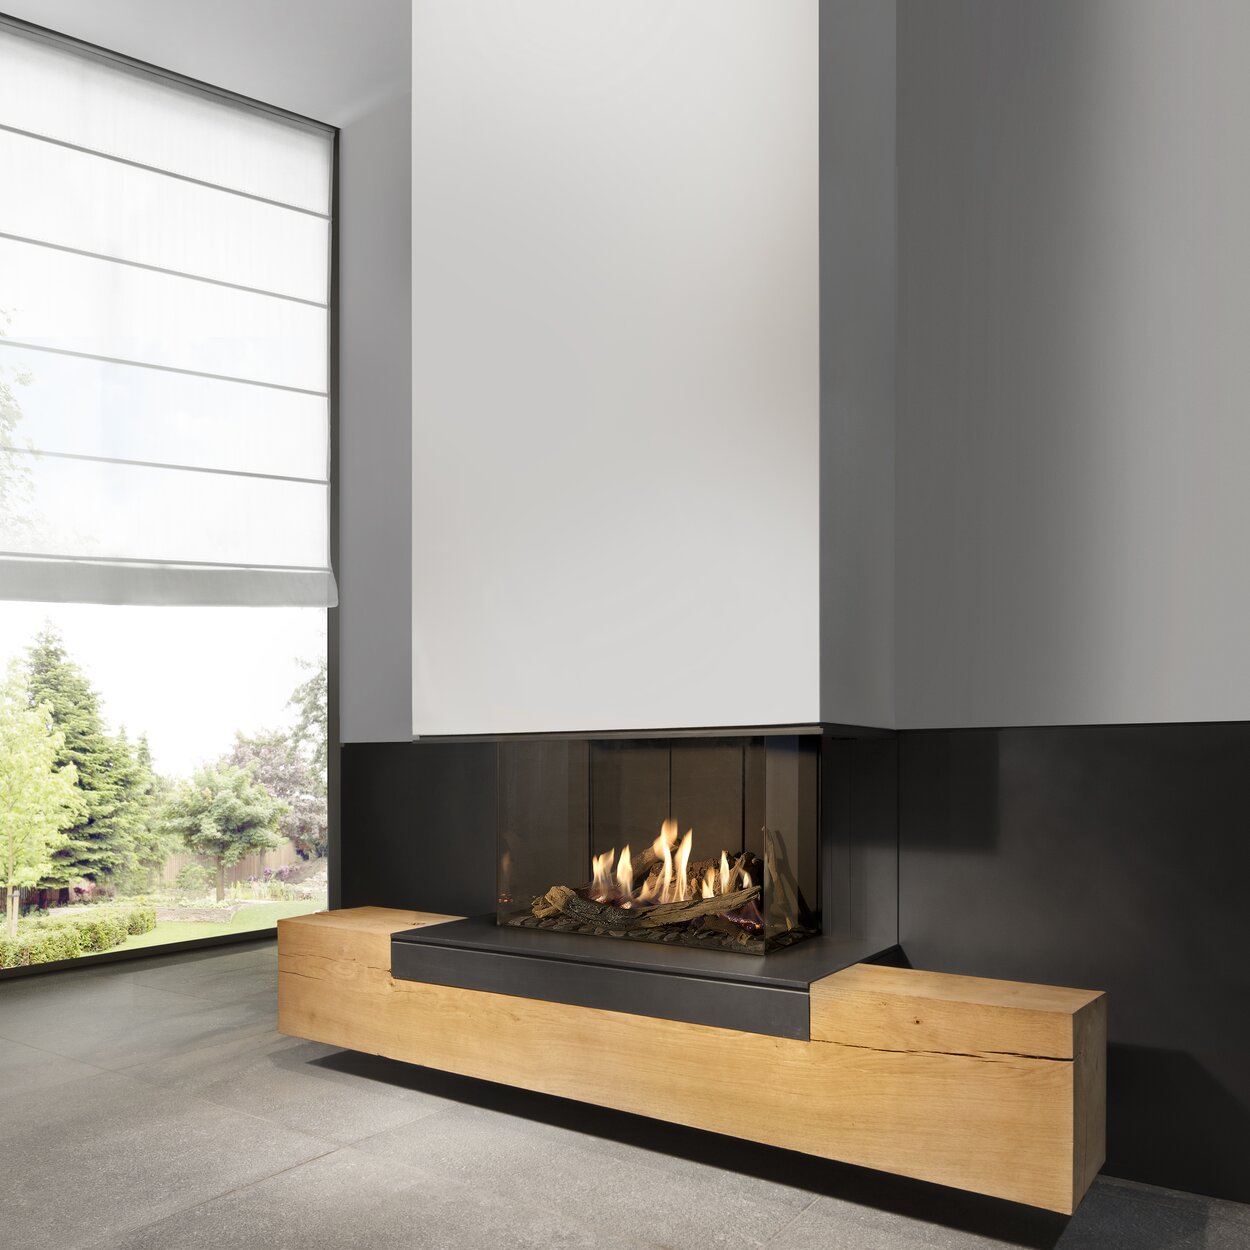 Gas fireplace G70/44S 3-sided glazed on wooden base with white panelling and dark rear wall